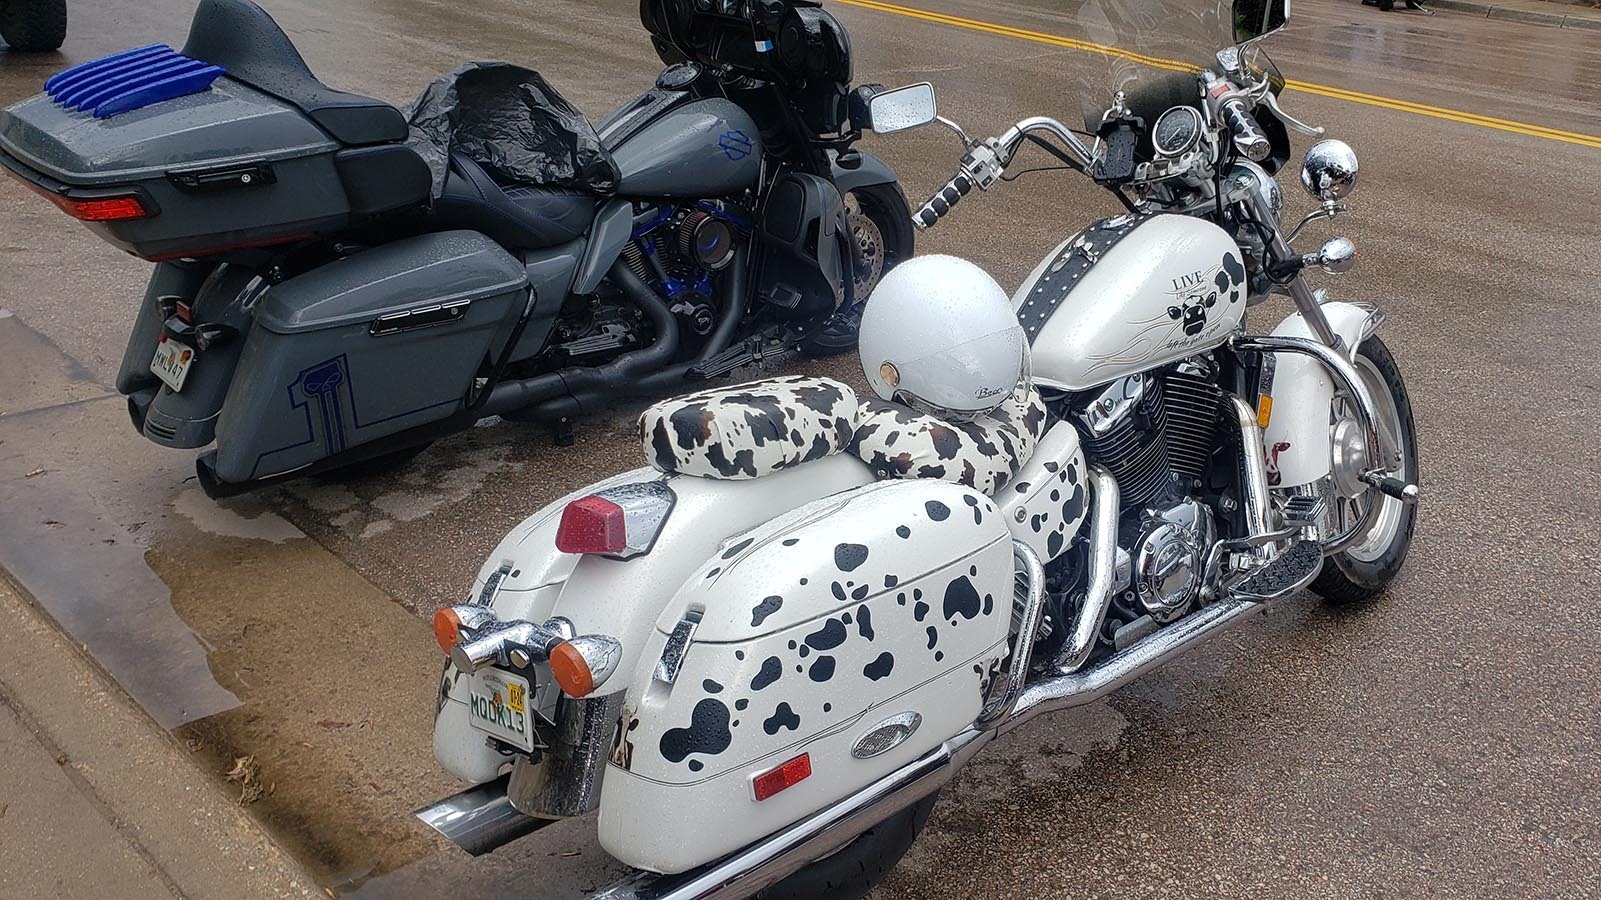 A Dalmatian-spotted motorcycle was among the rides parked in Hulett on a rainy Thursday afternoon.